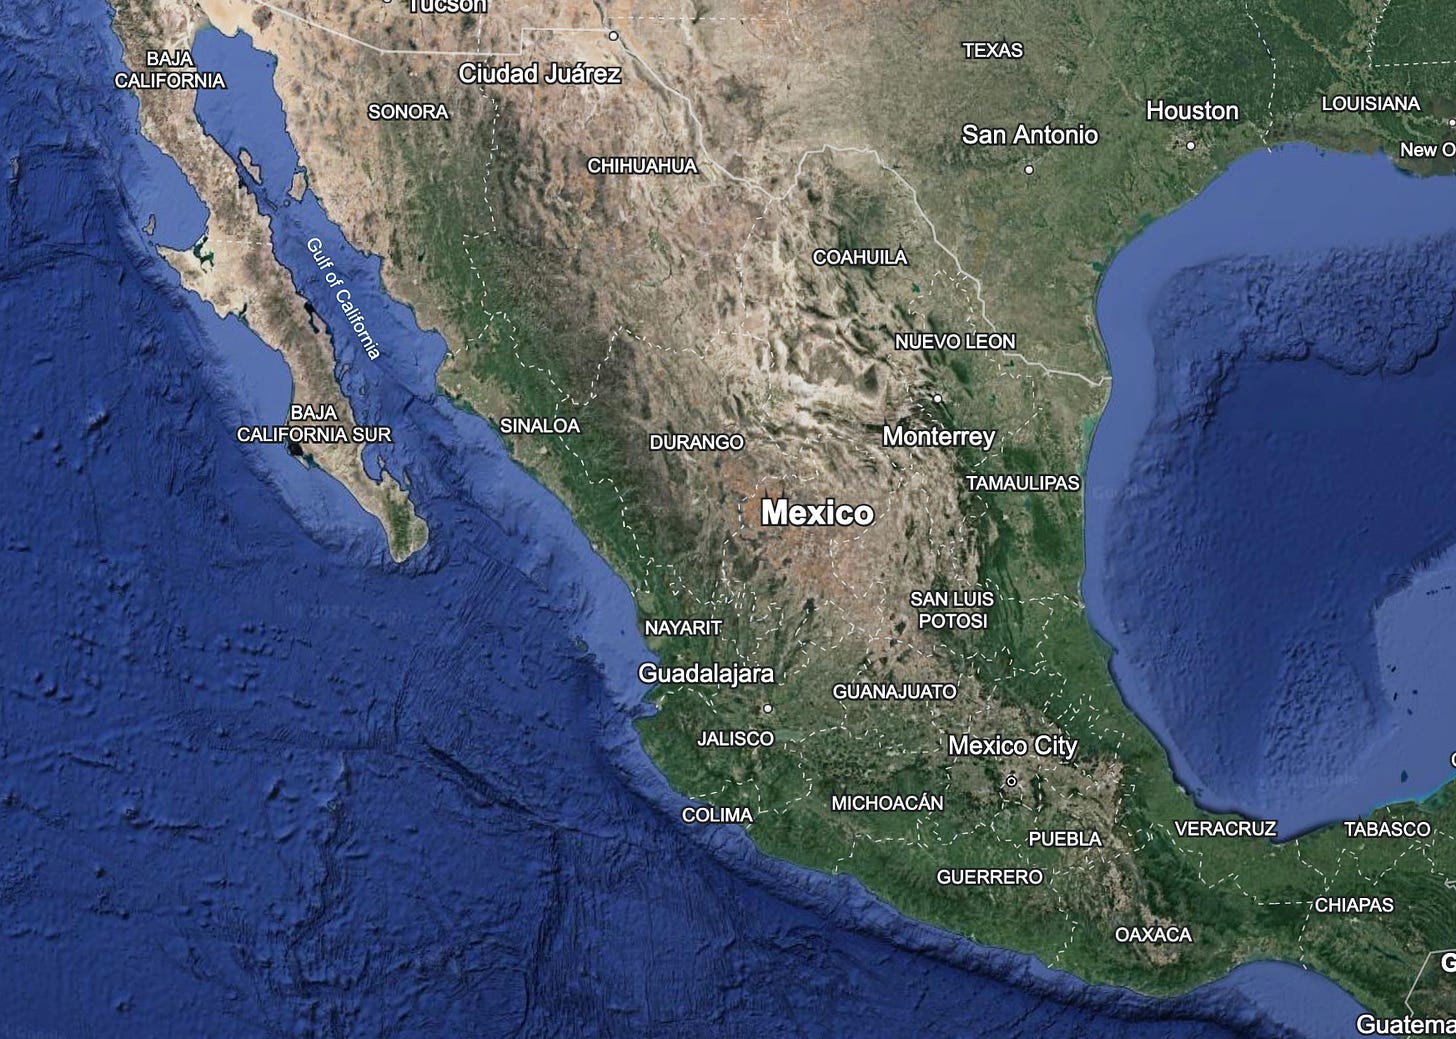 Google Earth image of Mexico